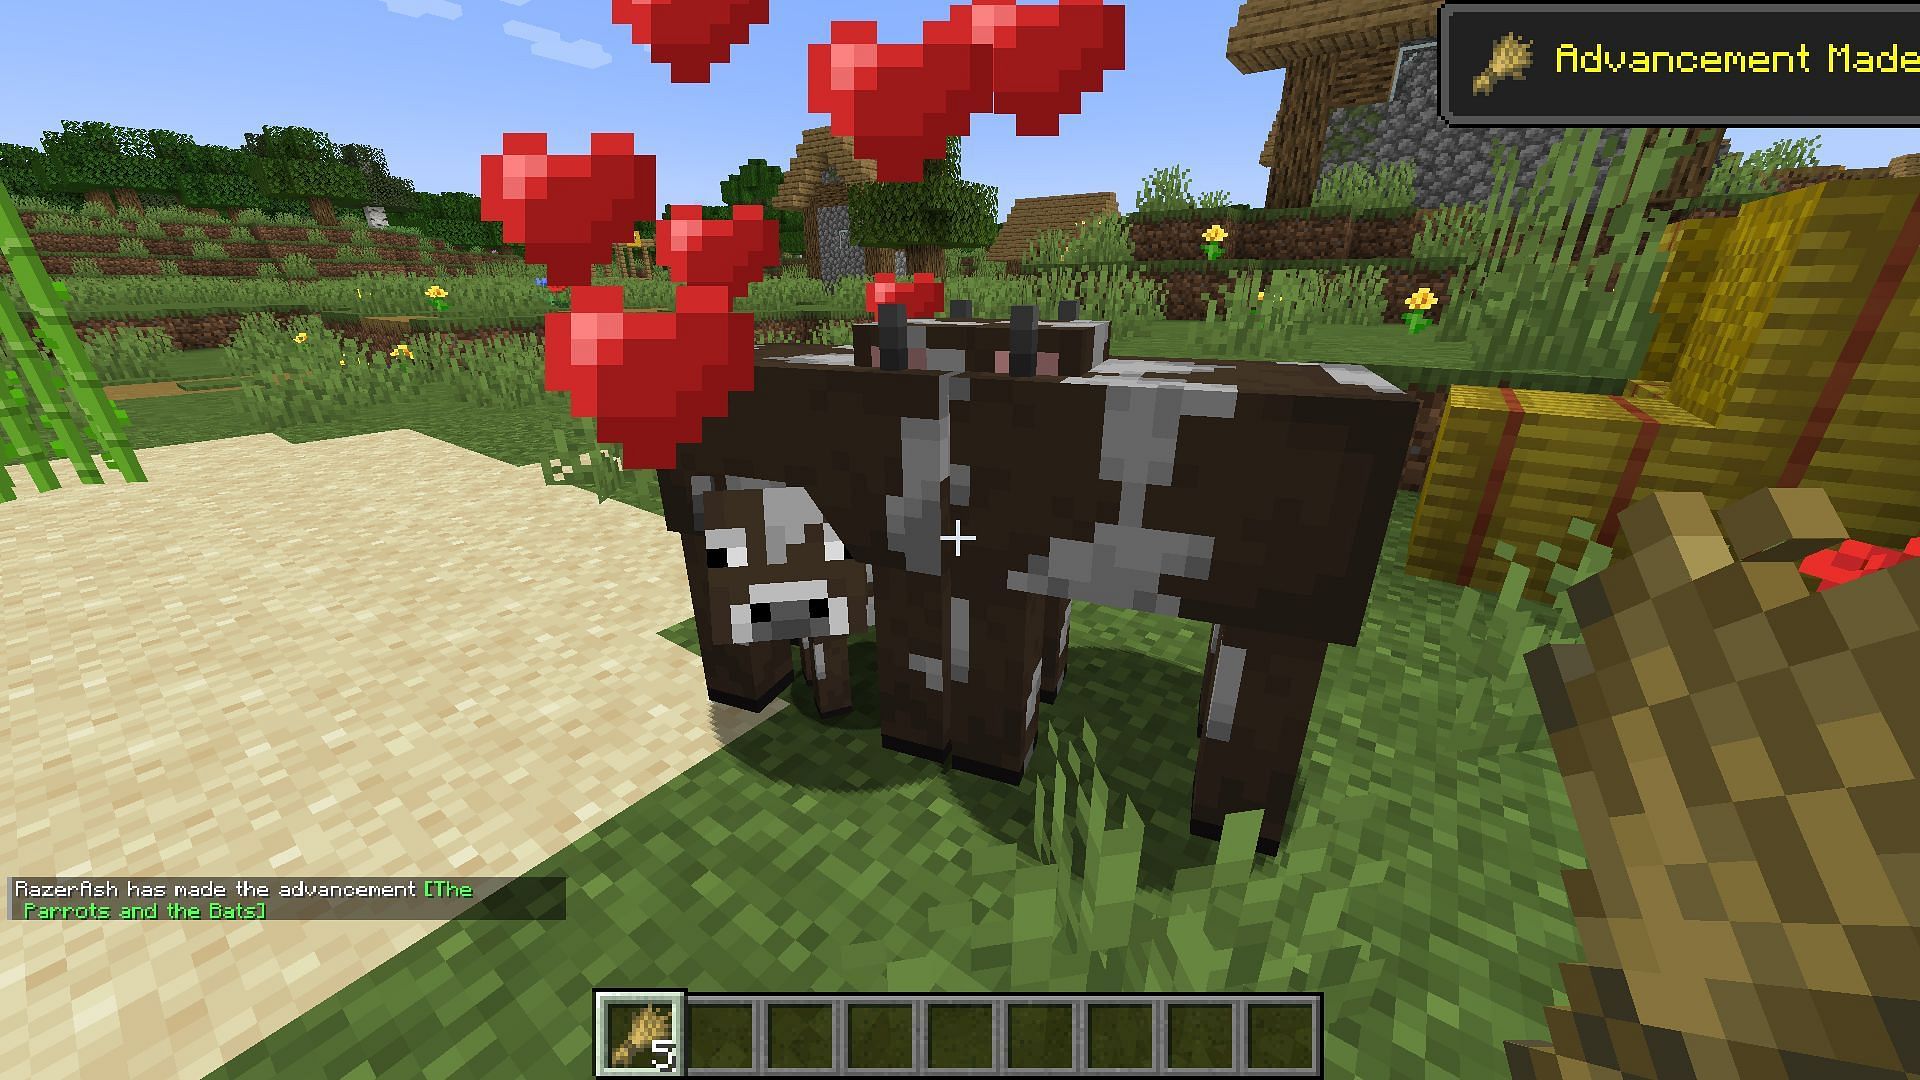 Baby cow spawns after breeding is complete (Image via Minecraft 1.19 update)